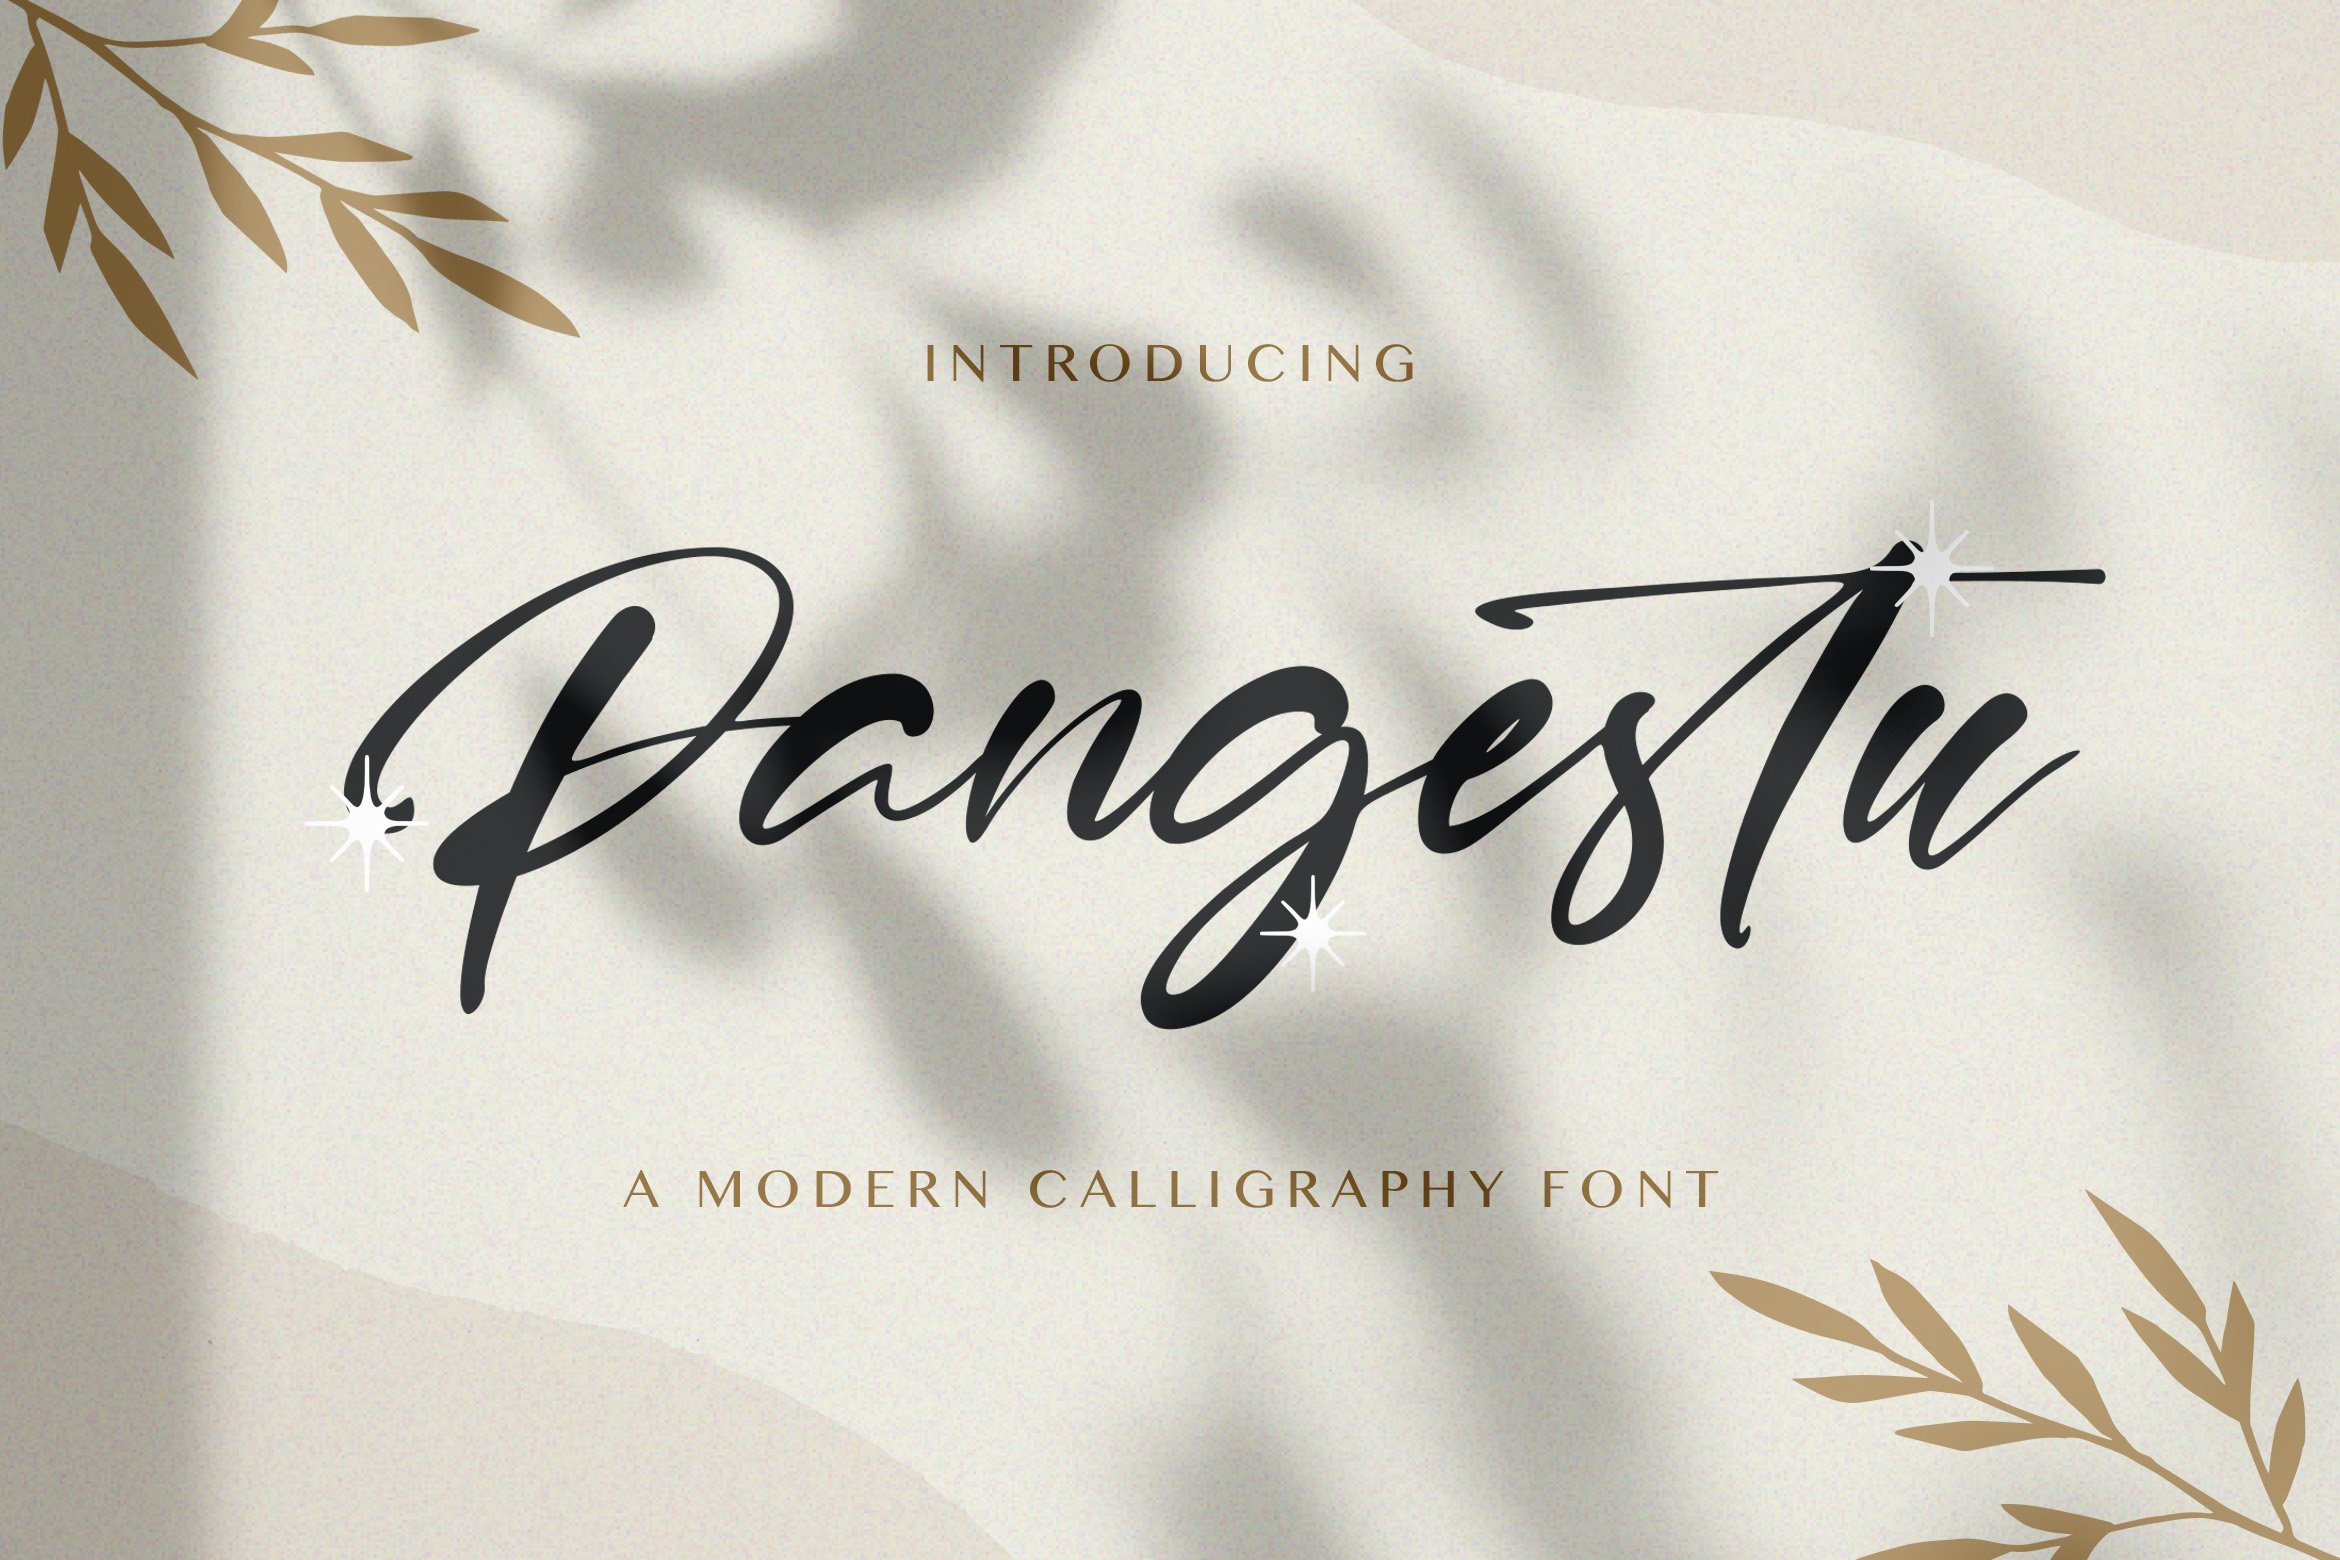 Pangestu - Calligraphy Font cover image.